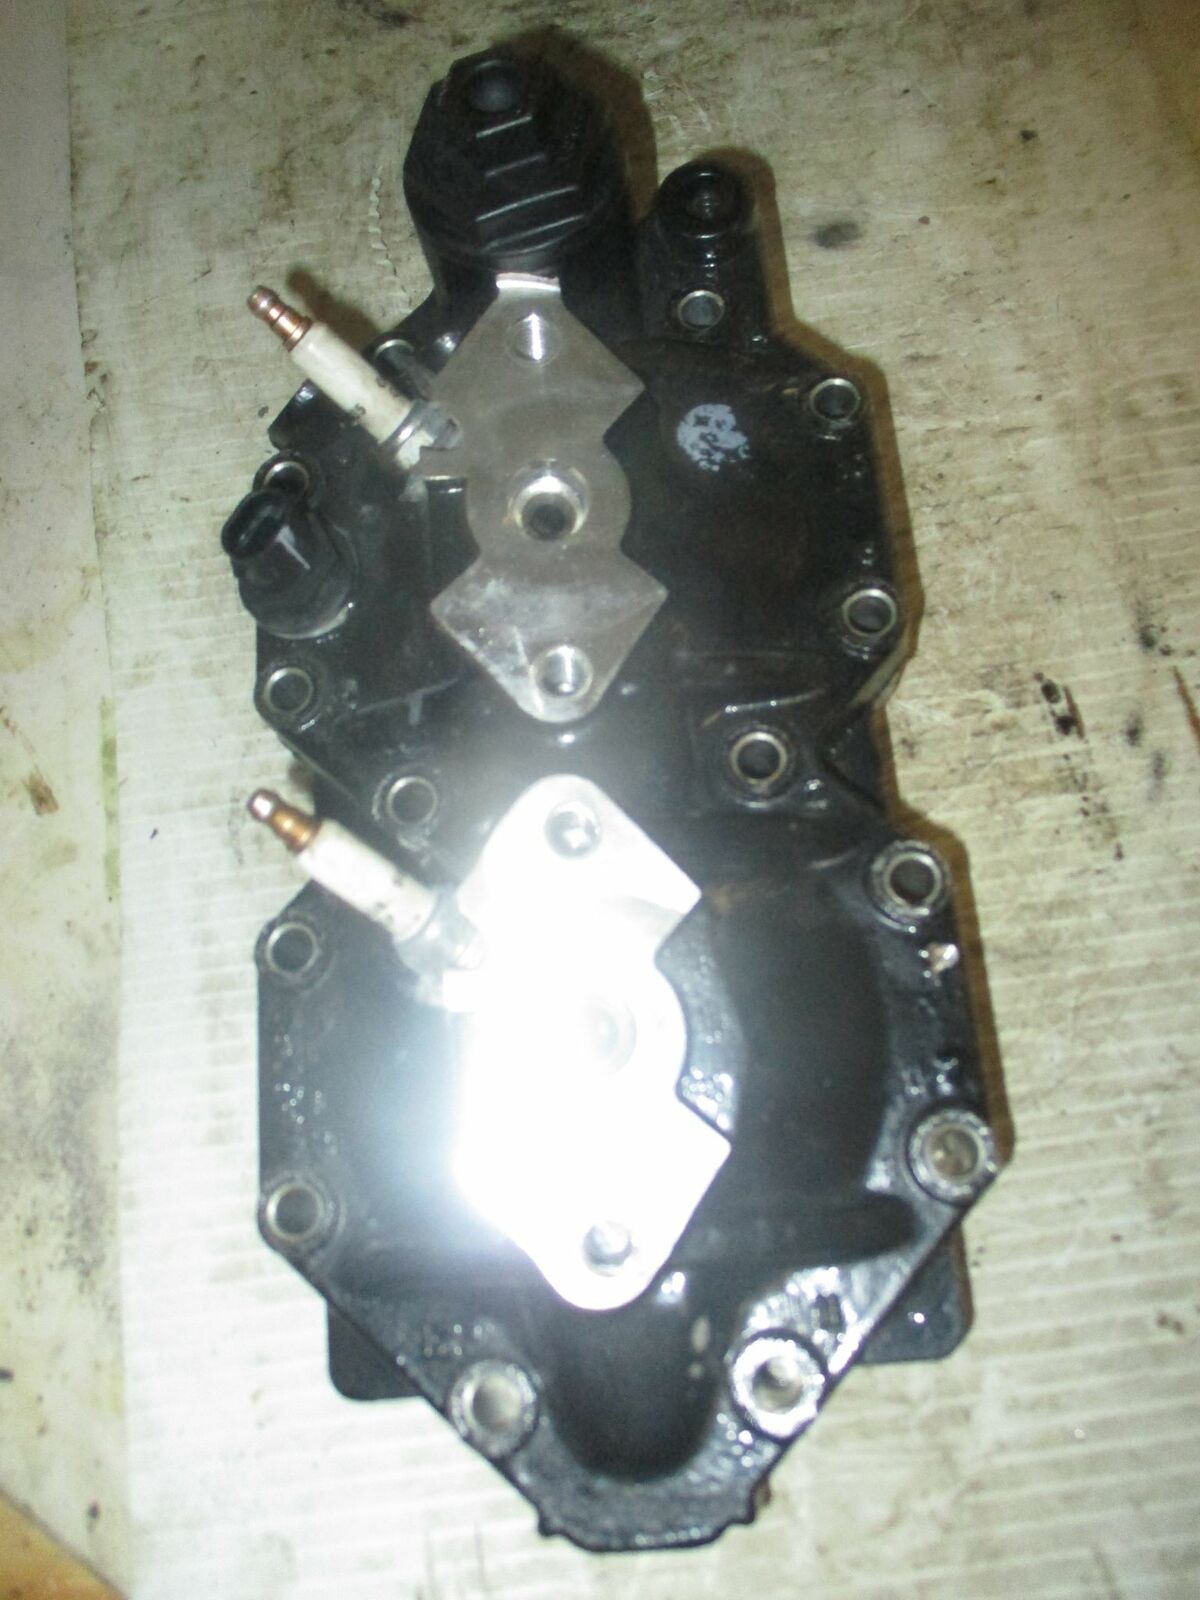 Evinrude ETEC 115hp outboard port cylinder head (350947)